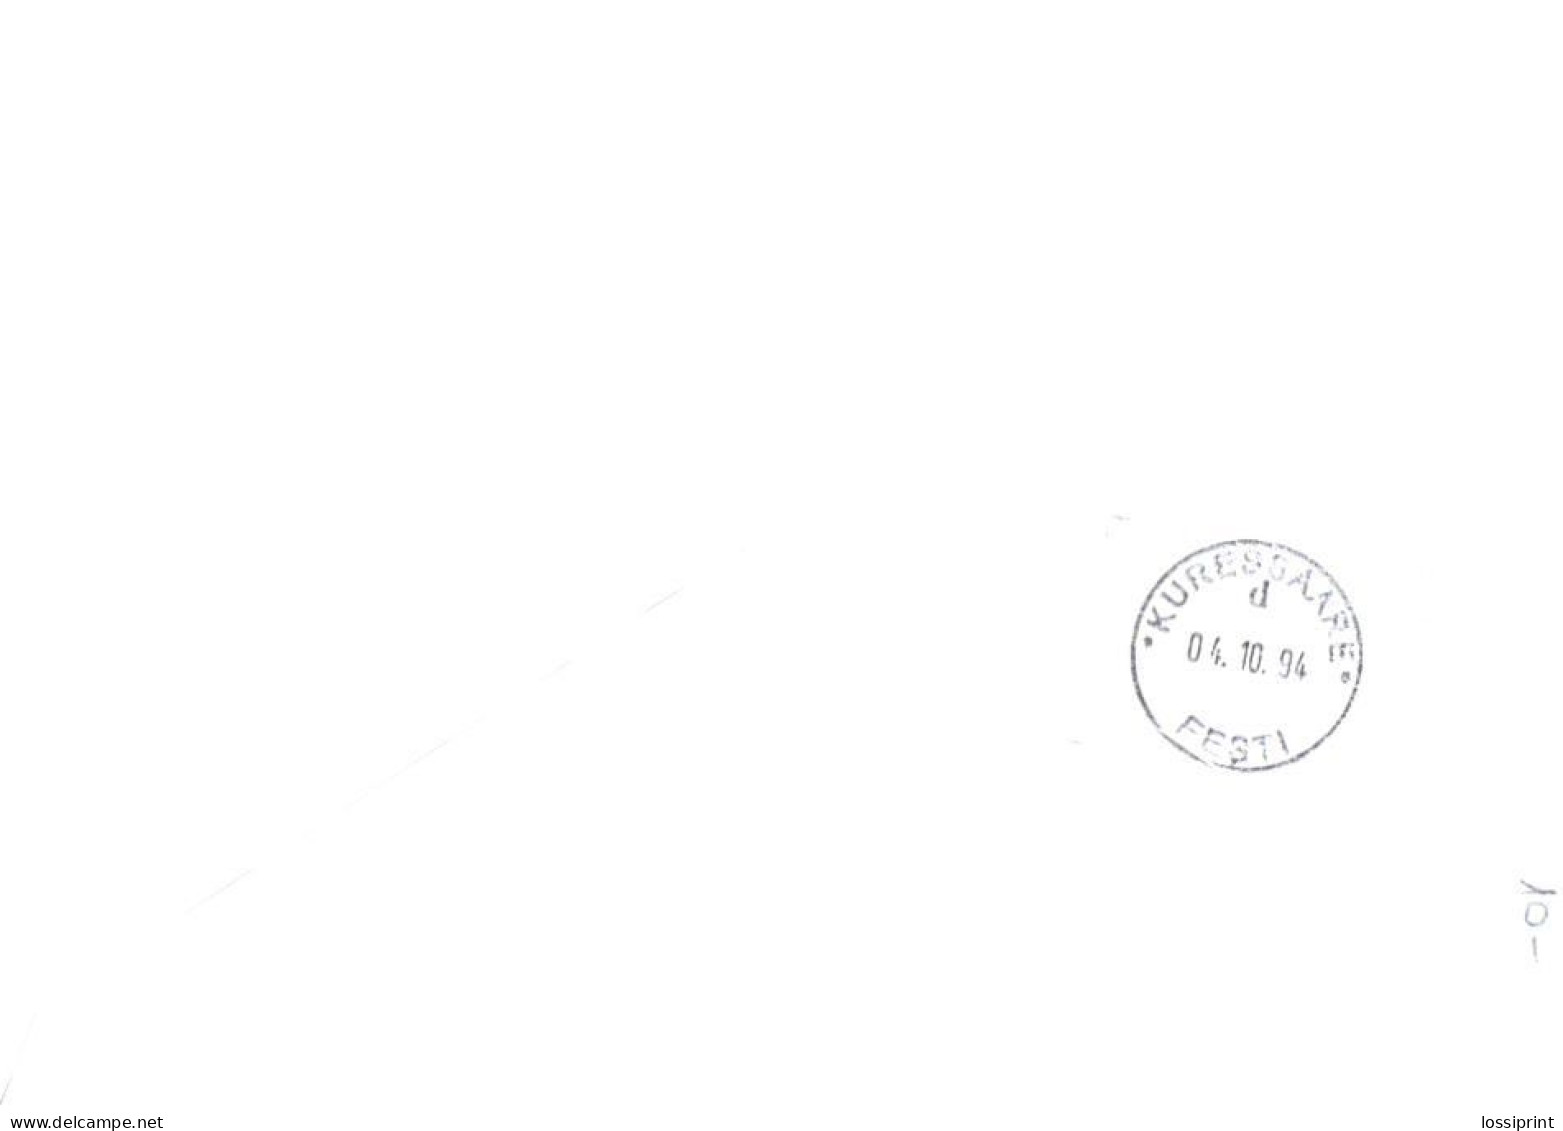 Estonia:Special Cancellation Postal Stamps Day In Stockholm With Cancellation M/S Estonia Catastrophe Stamped In Tallinn - Estonia